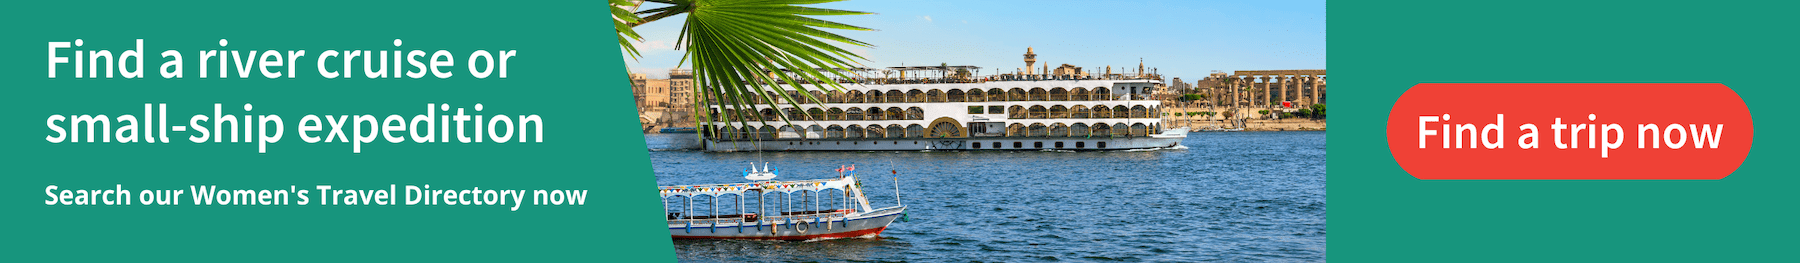 uniworld river cruises with no single supplement